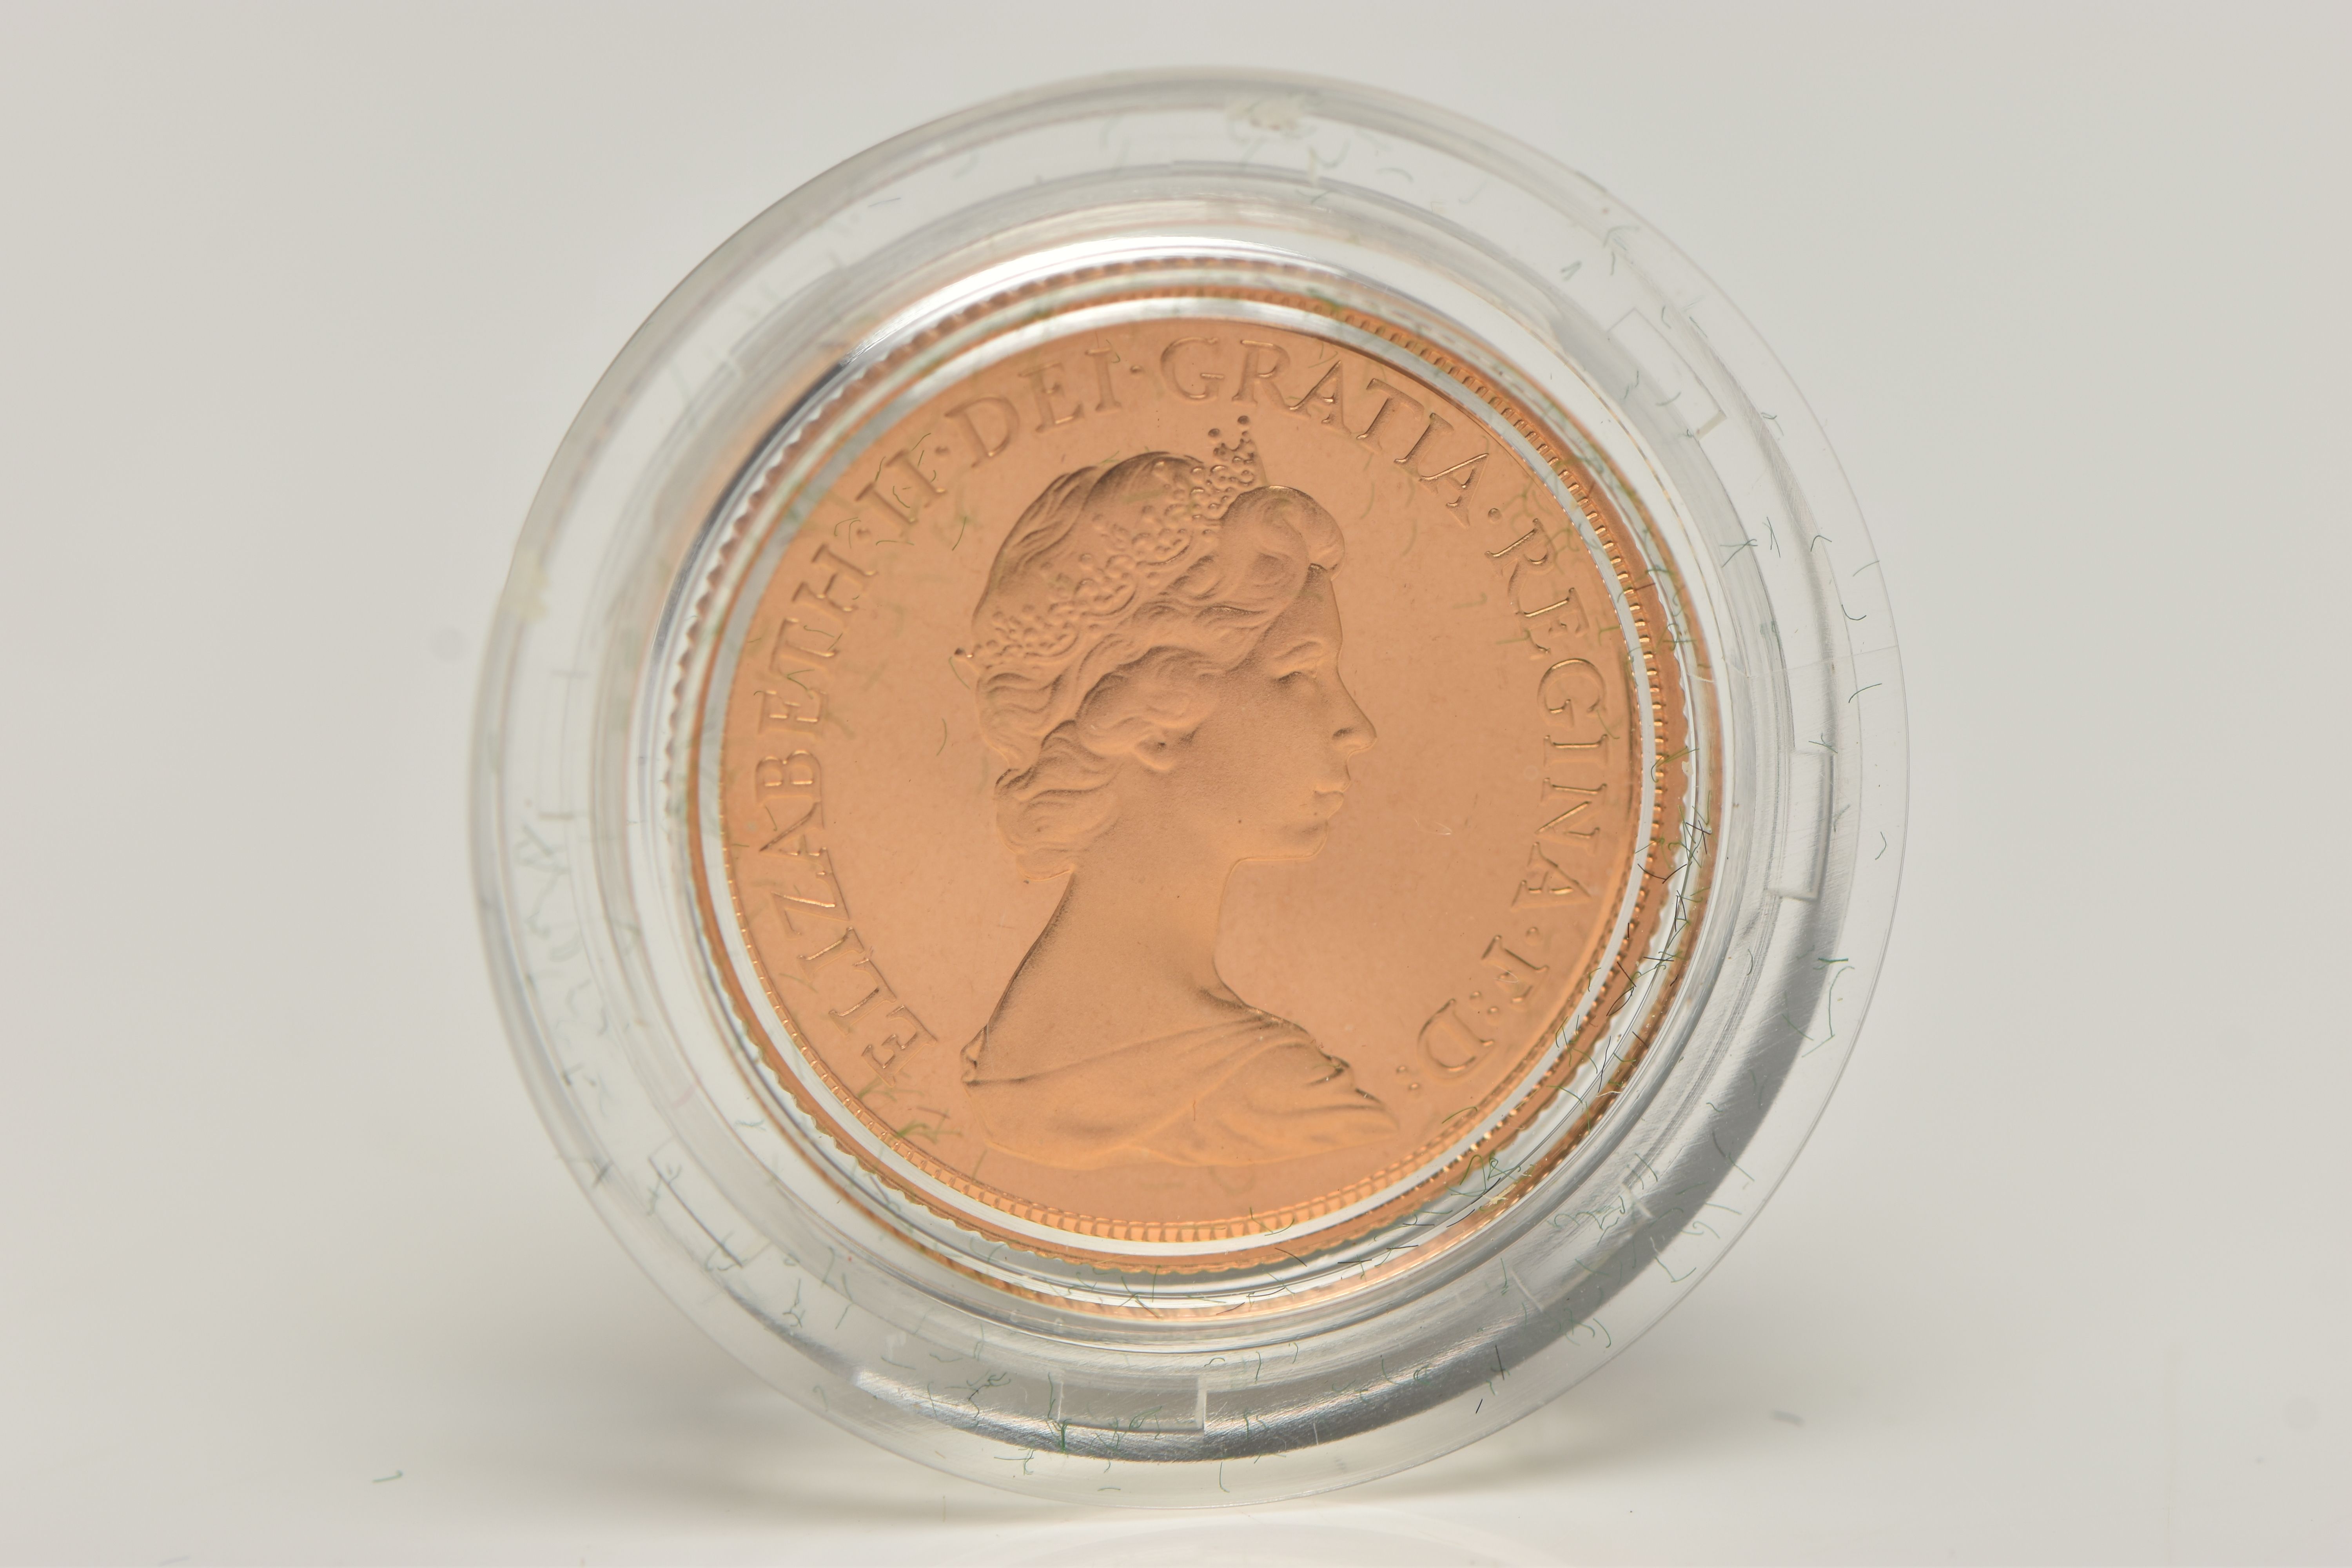 A ROYAL MINT 1980 QUEEN ELIZABETH II GOLD PROOF SOVEREIGN IN CASE OF ISSUE (No COA} - Image 2 of 2